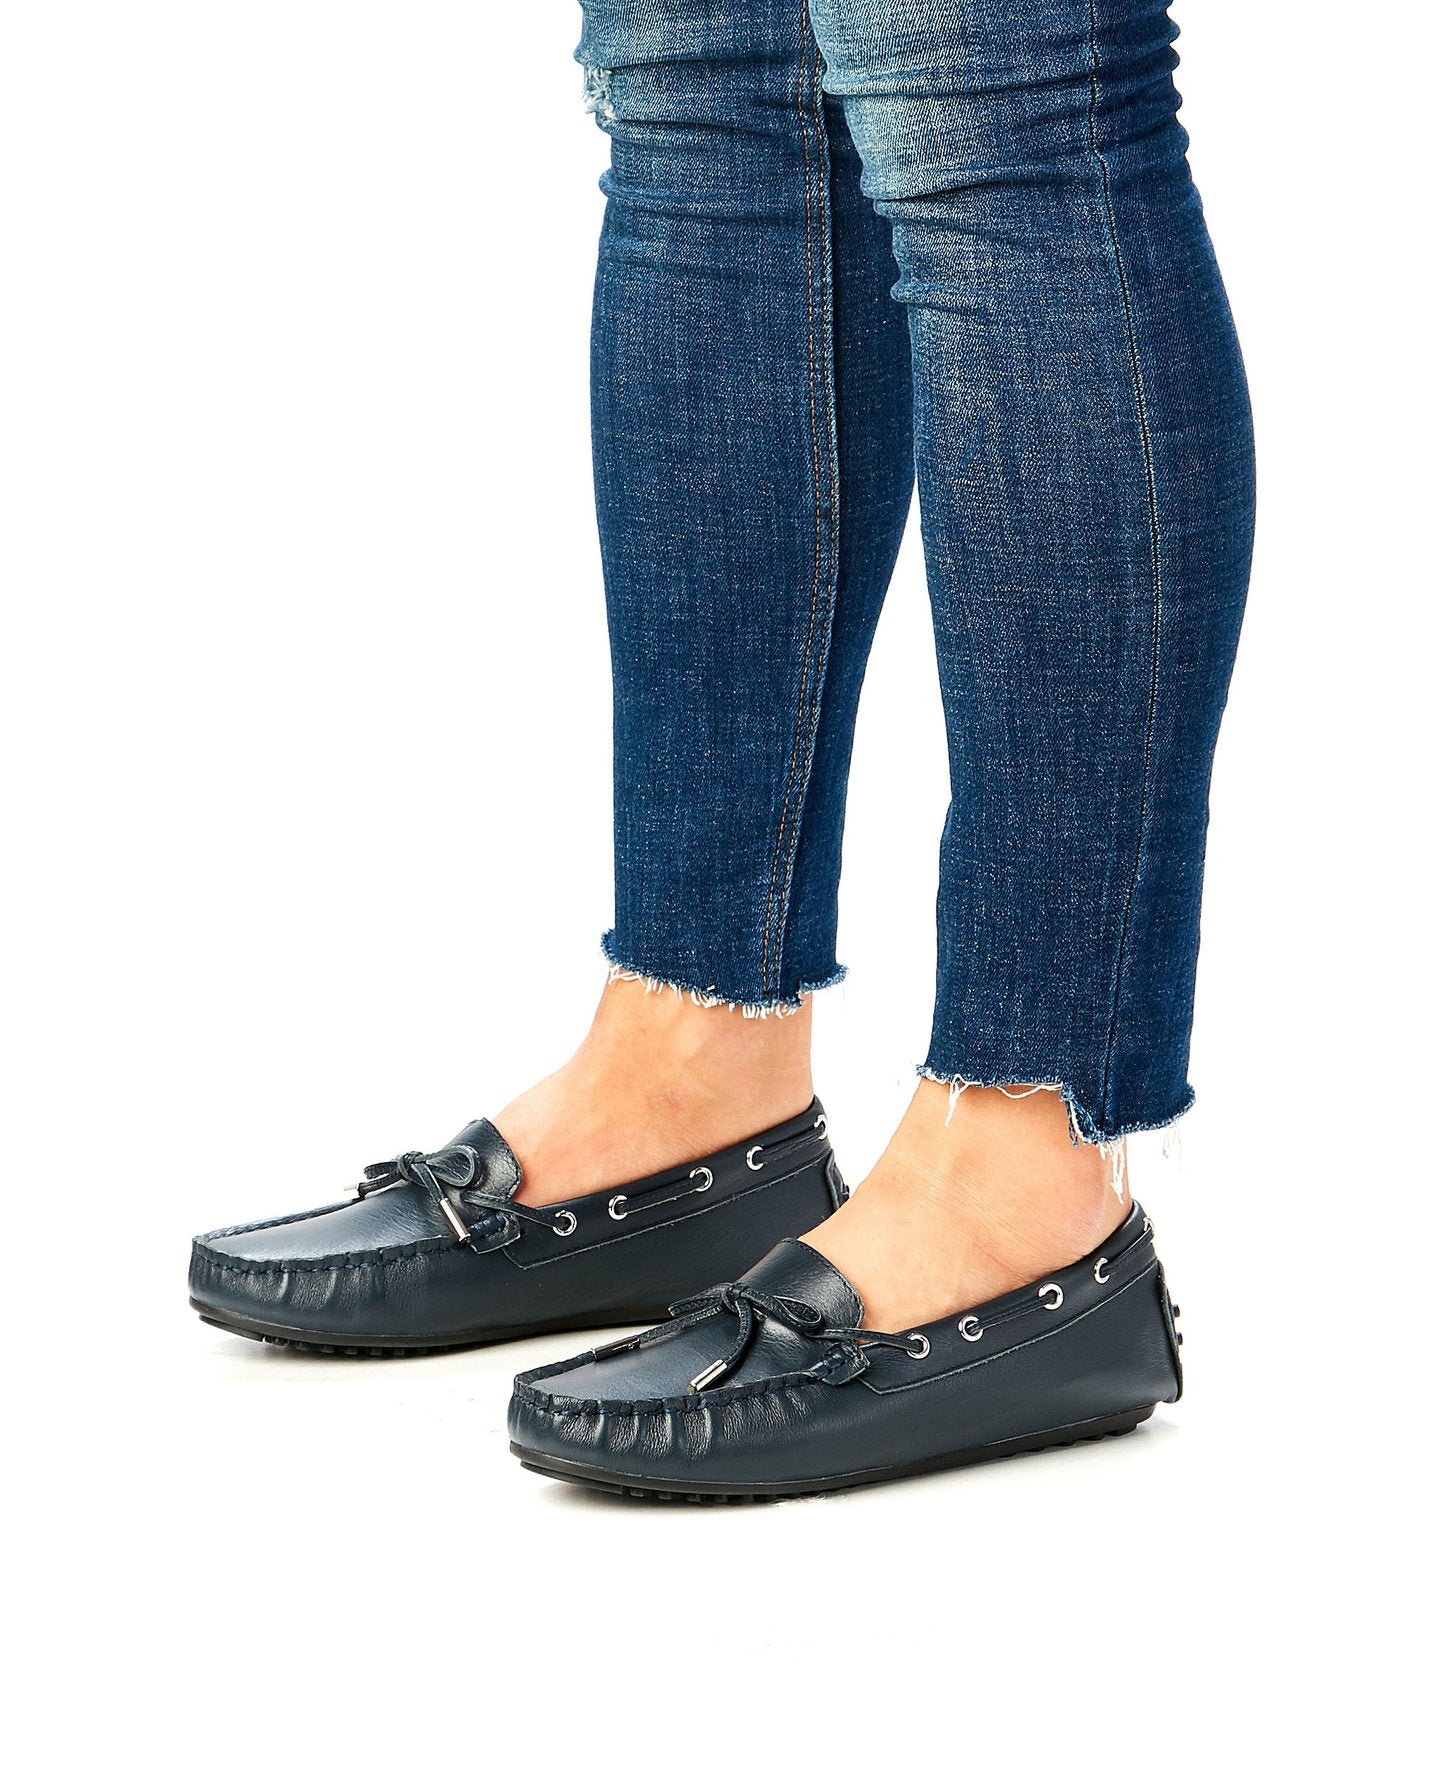 Daria Leather Loafer in Navy - Milu James St